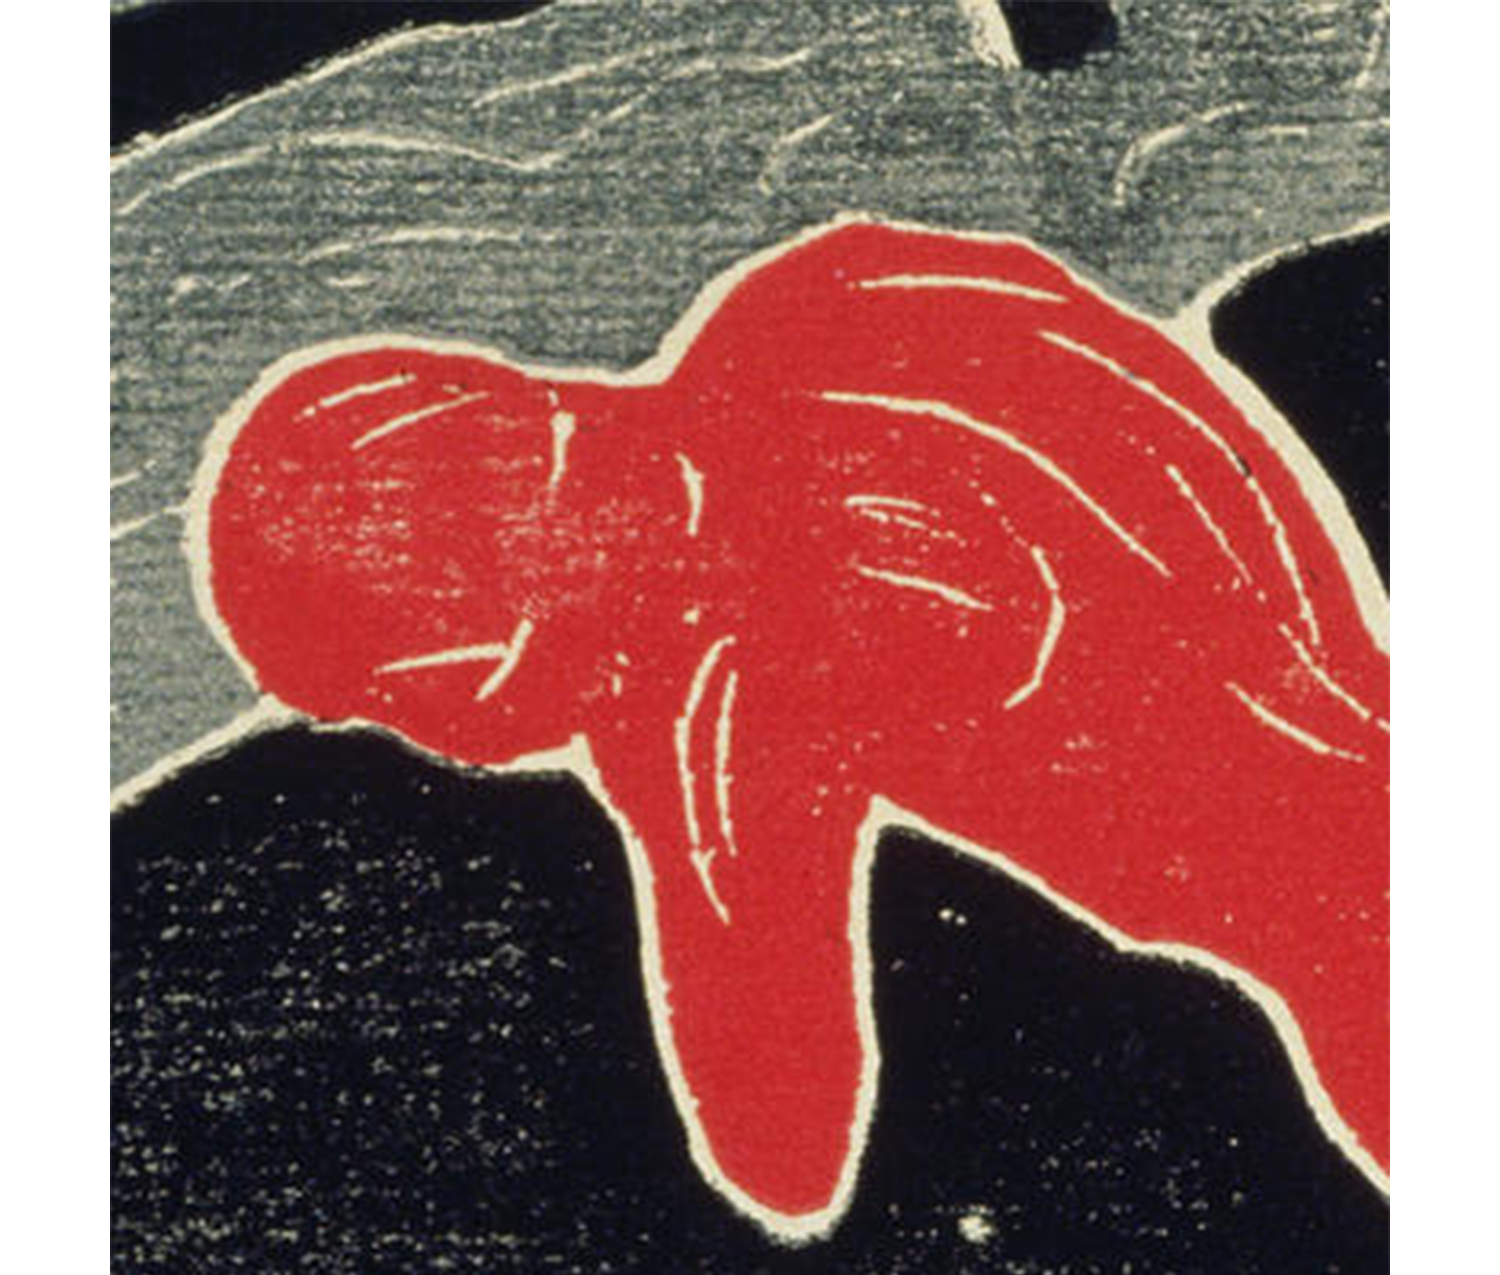 red and gray figures against a black background; red figure turns its head away from the gray figure